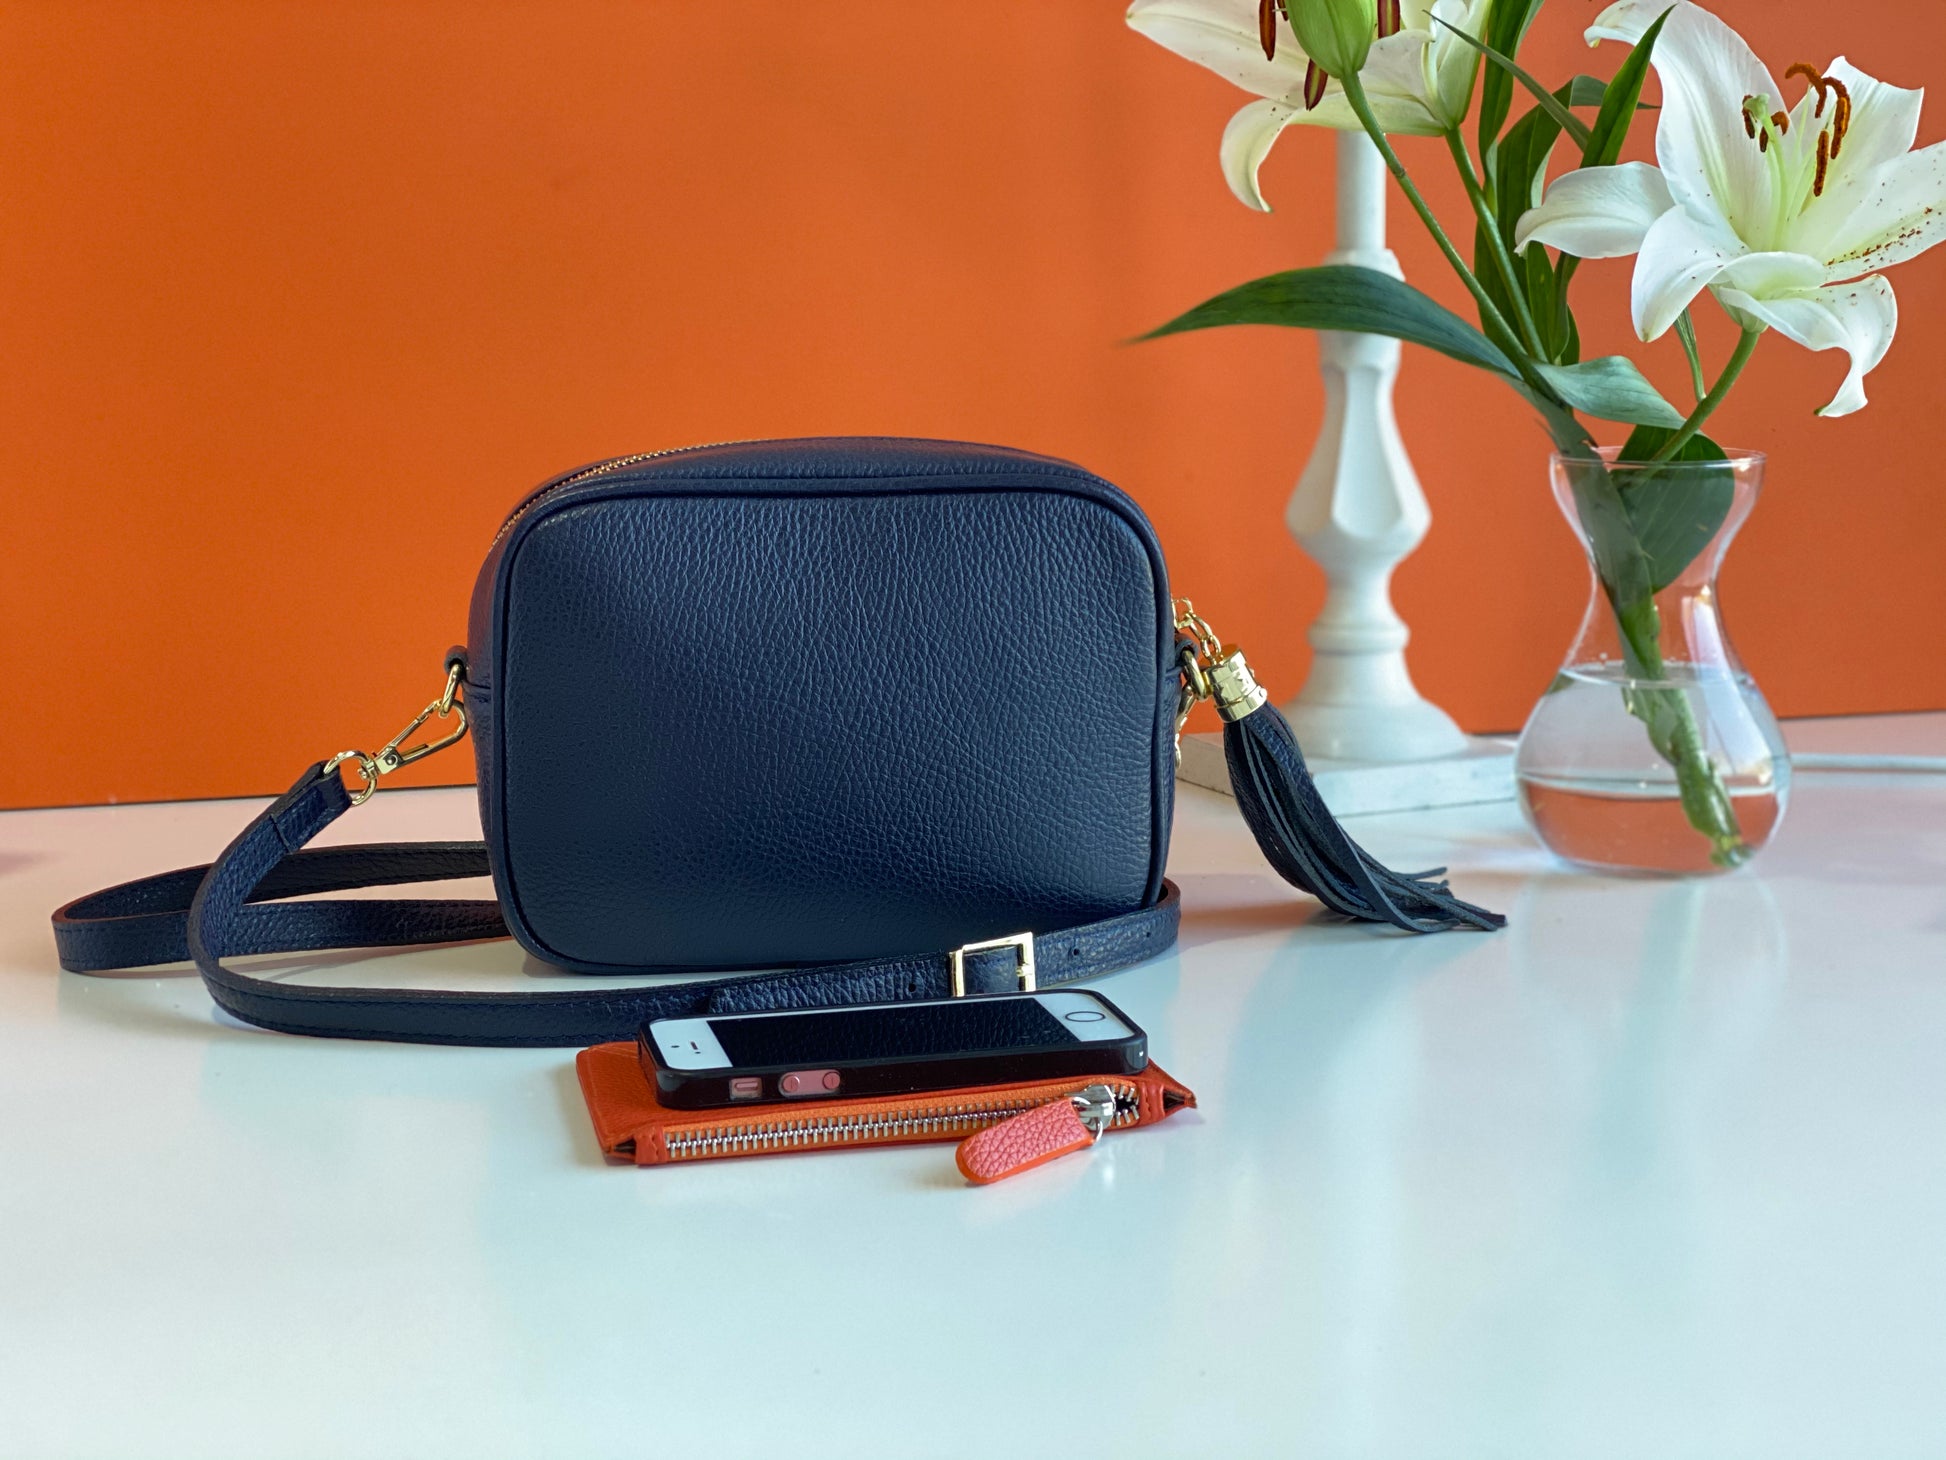 An image of a navy blue leather messenger bag with an orange purse and a mobile phone in front of it. There is a  vase of lilies next to the bag.